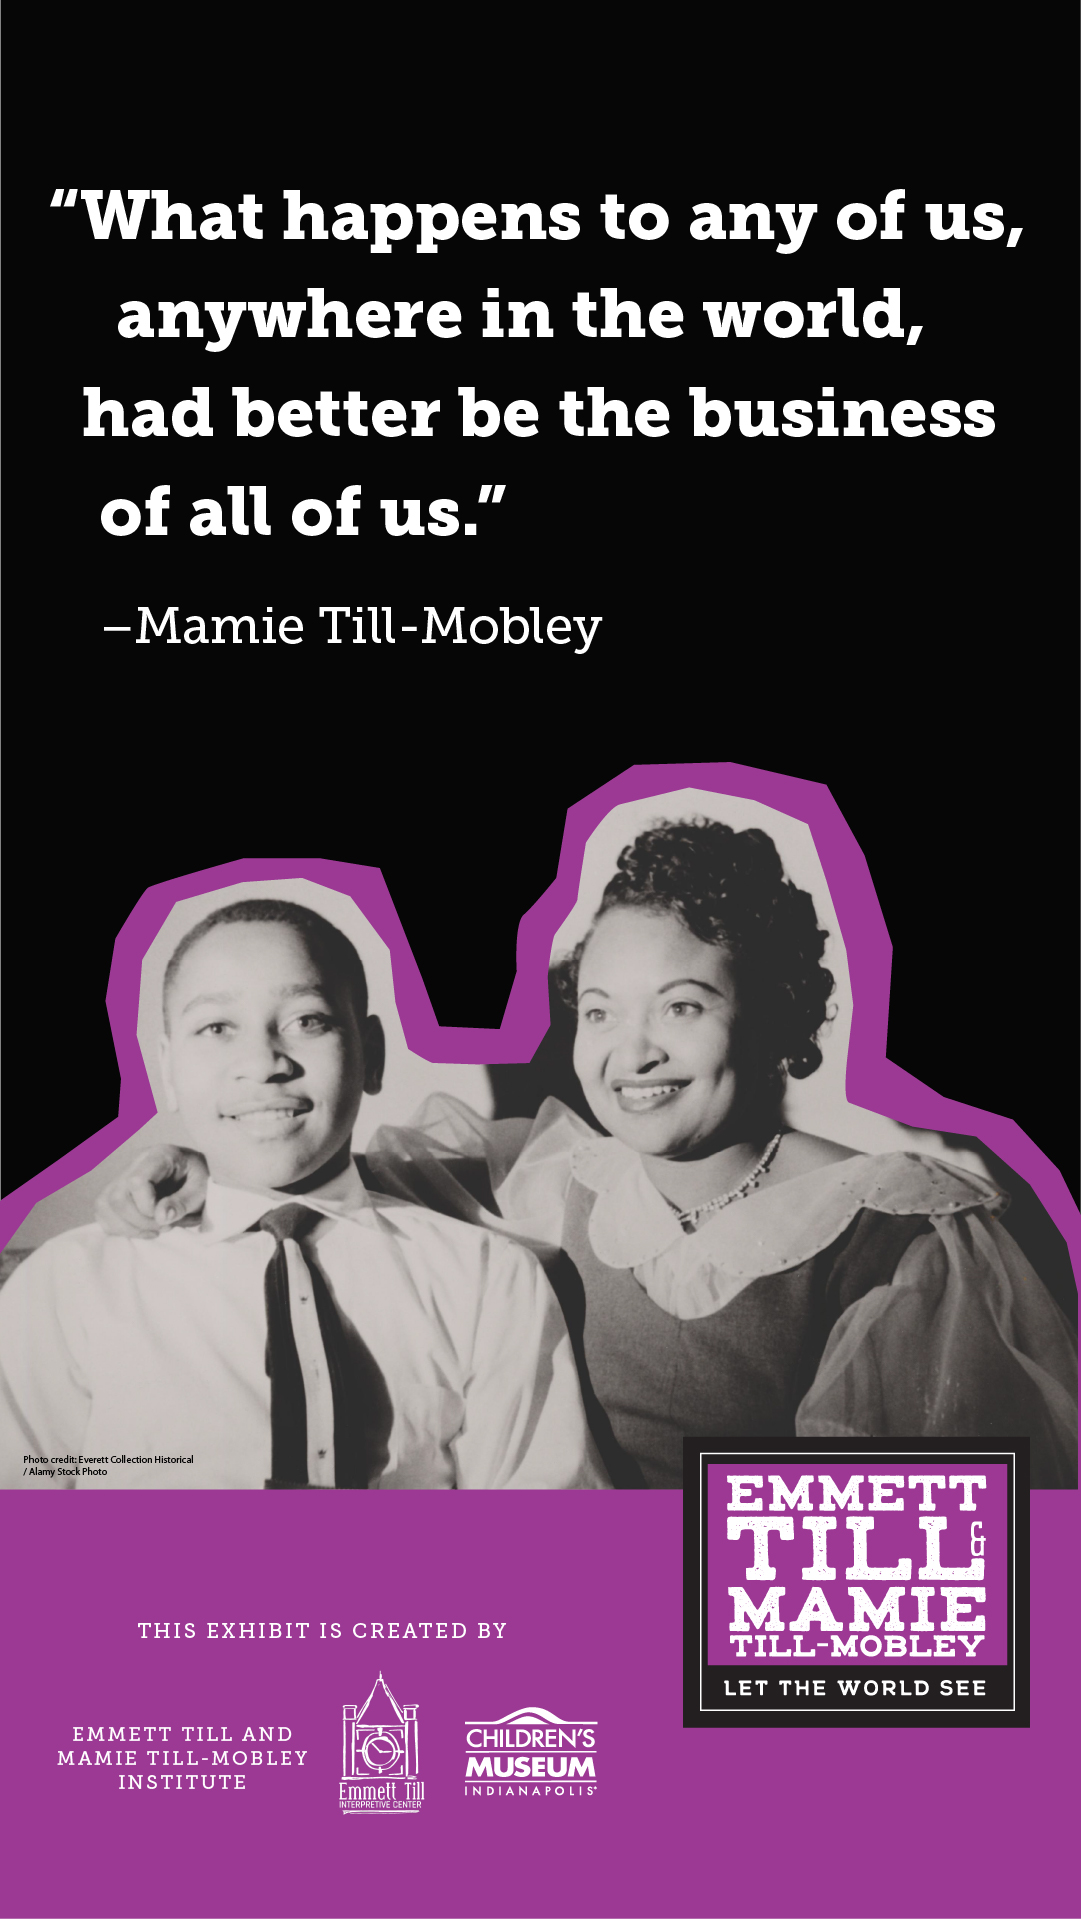 "What happens to any of us, anywhere in the world, had better be the business of all of us." -Mamie Till-Mobley